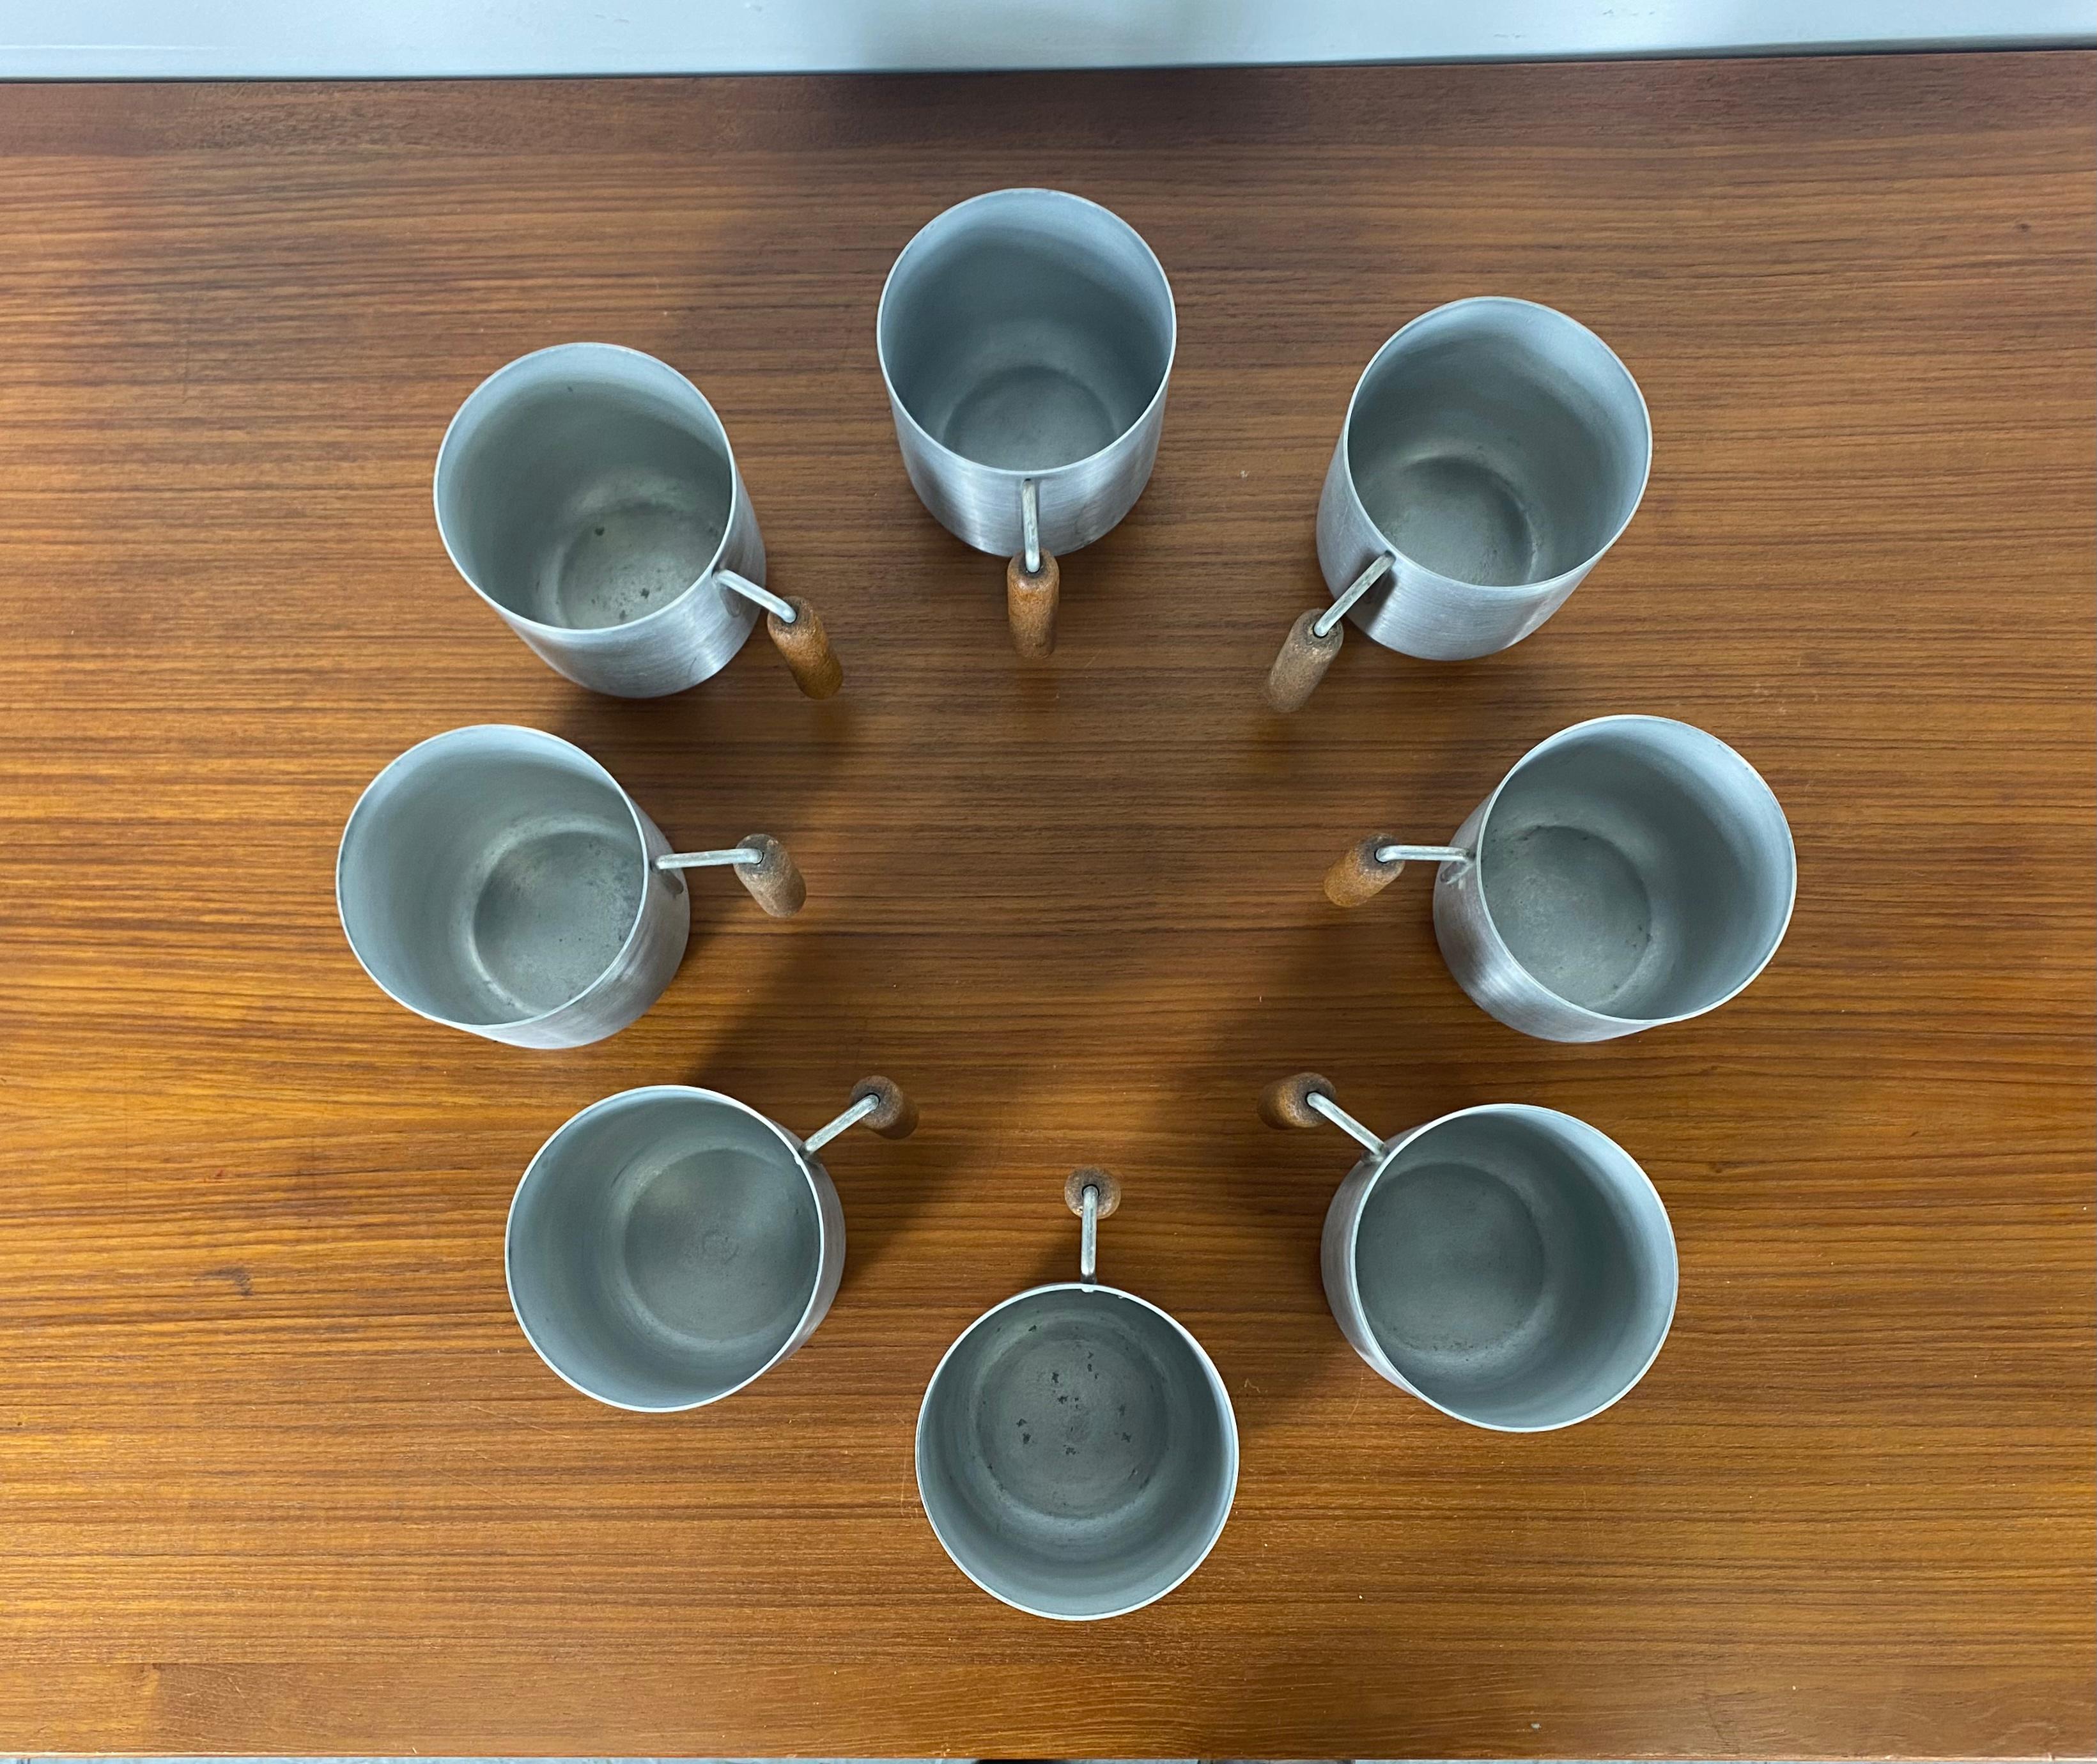 Seldom seen set of 8 Spun Aluminum and Cork Tankards / Mugs designed by Russel Wright.. Beautiful original condition, All retain Impressed Russel Wright stamp, Functional as well as wonderful Modernist sculpture.